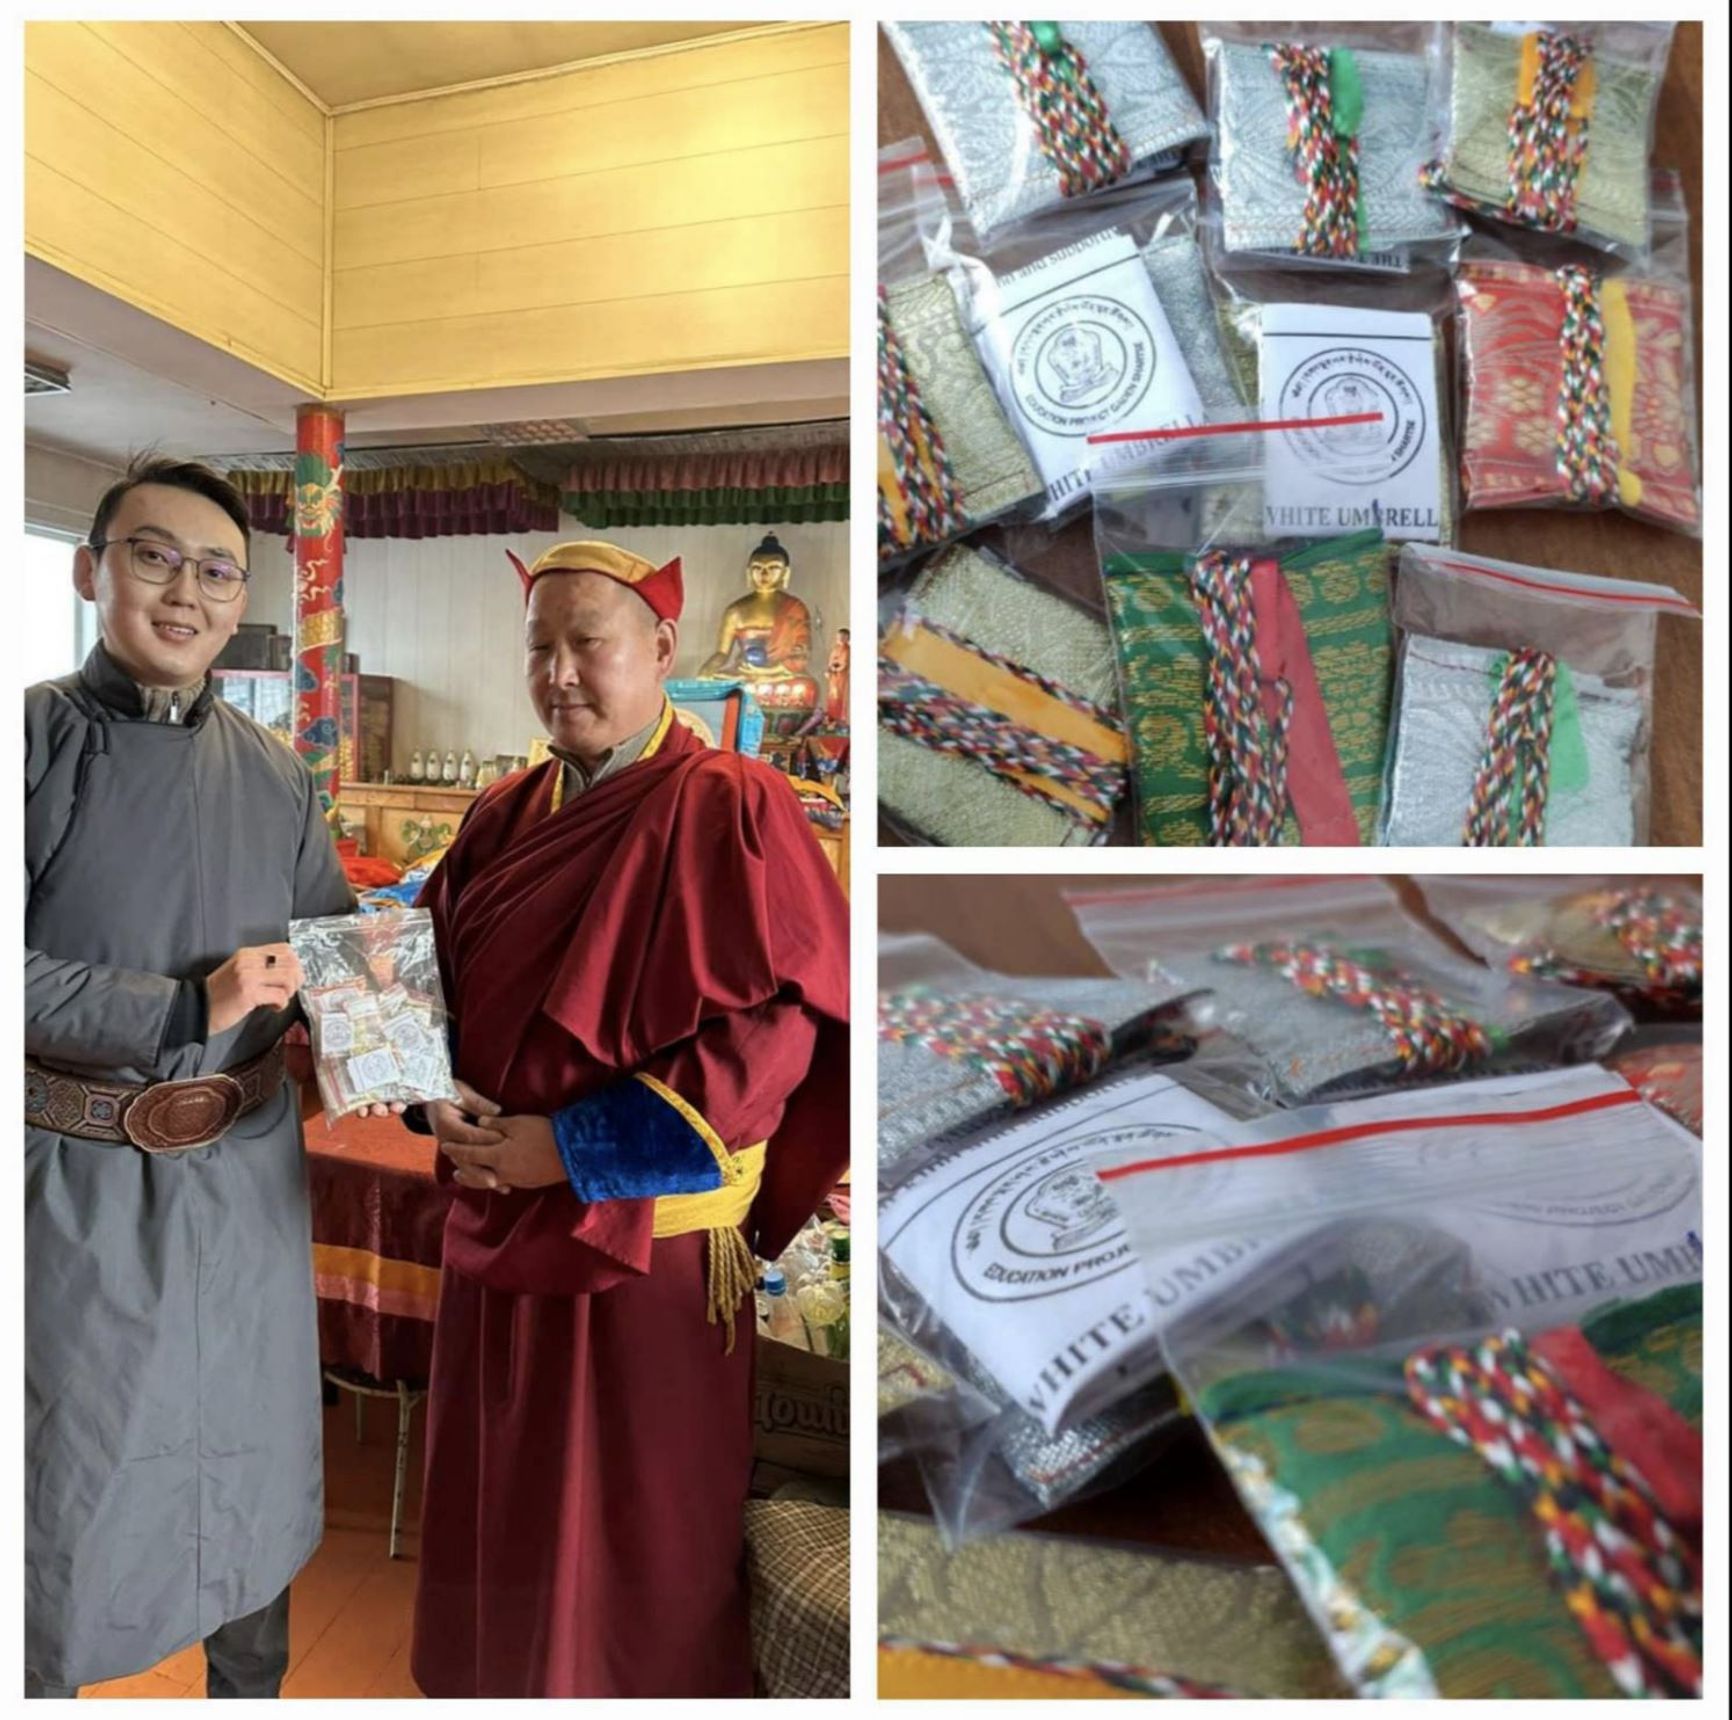 Buryatia provided 15 talismans, consecrated by the Dalai Lama, to participants in the SMO